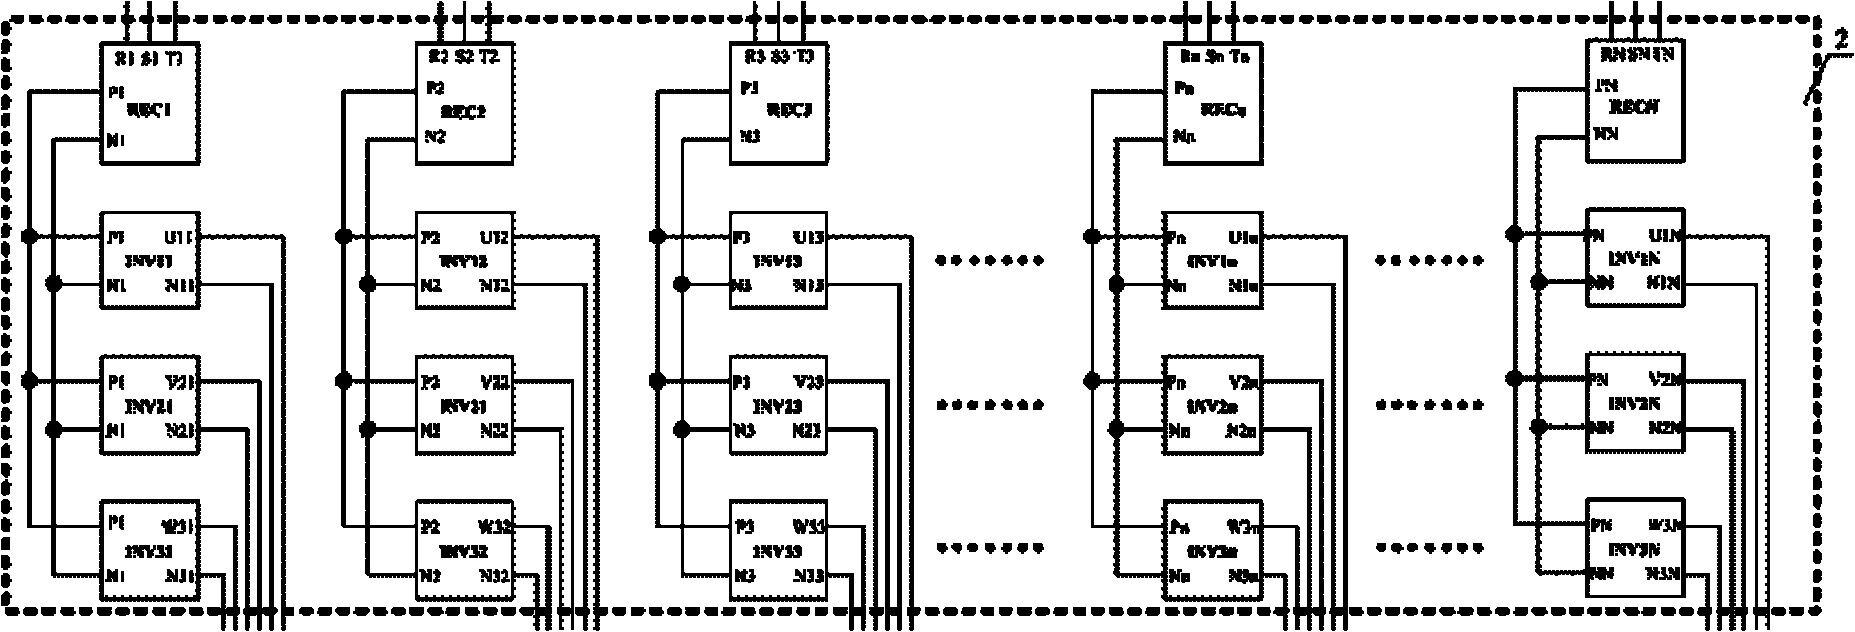 Medium voltage frequency conversion power circuit system